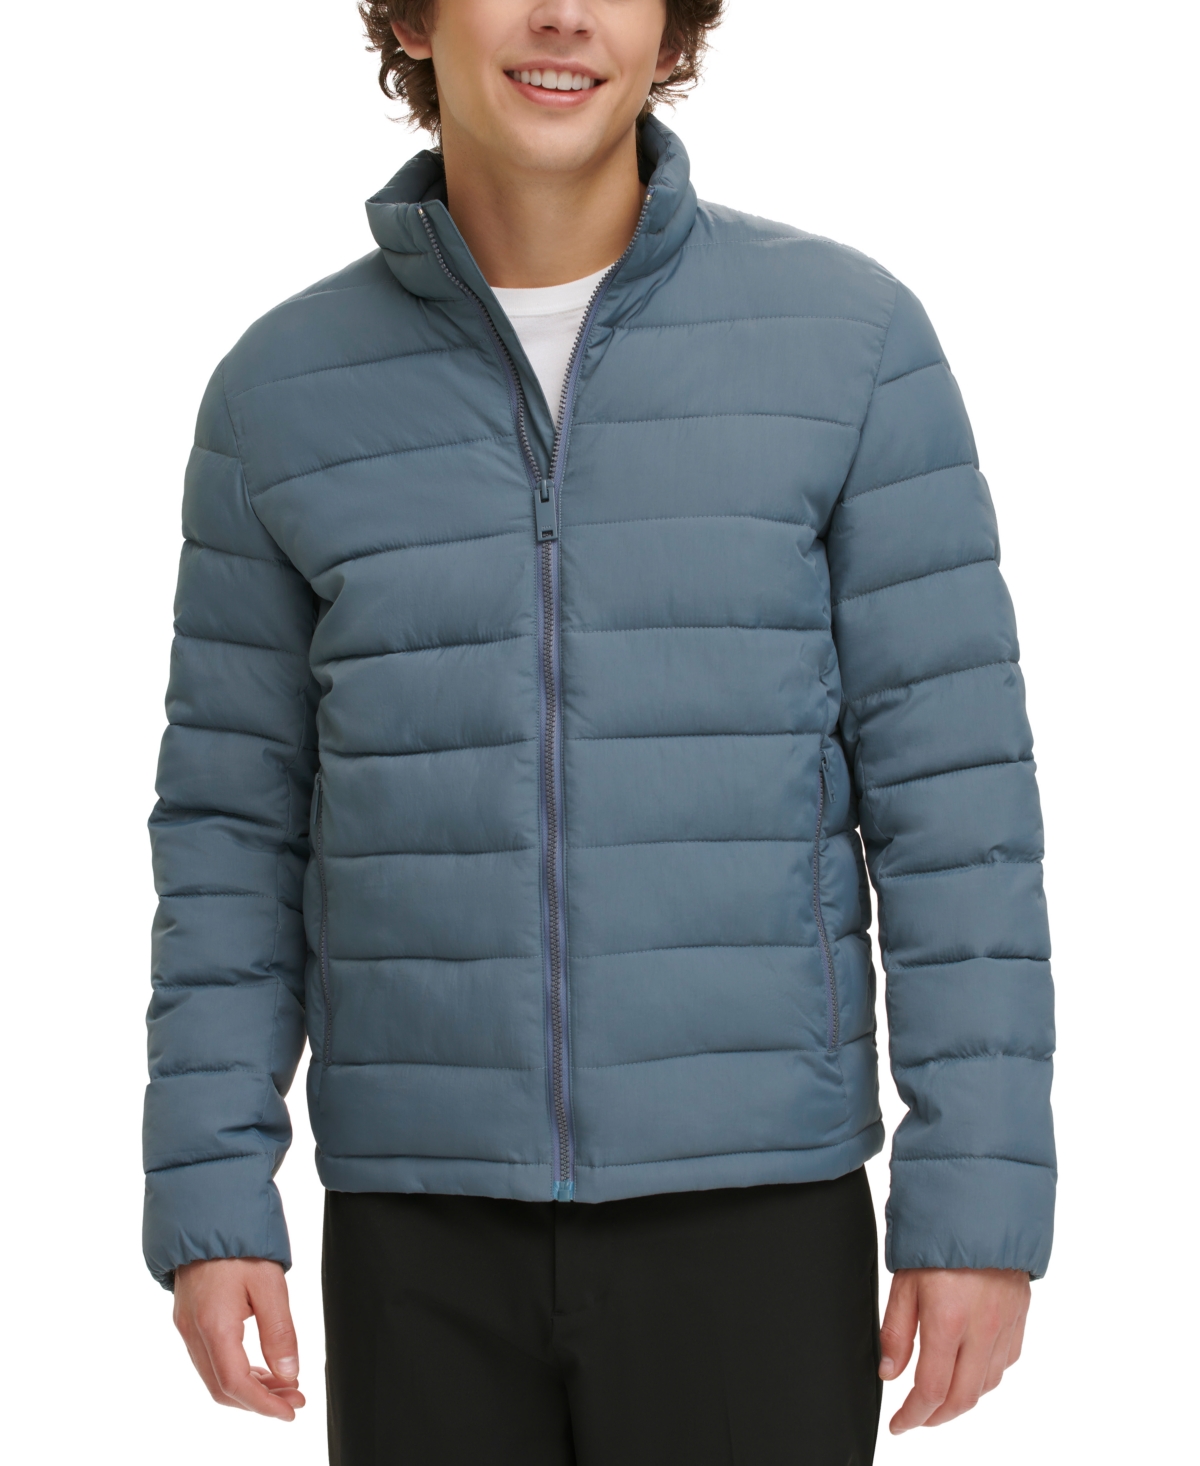 Dkny Men's Quilted Full-zip Stand Collar Puffer Jacket In Blue